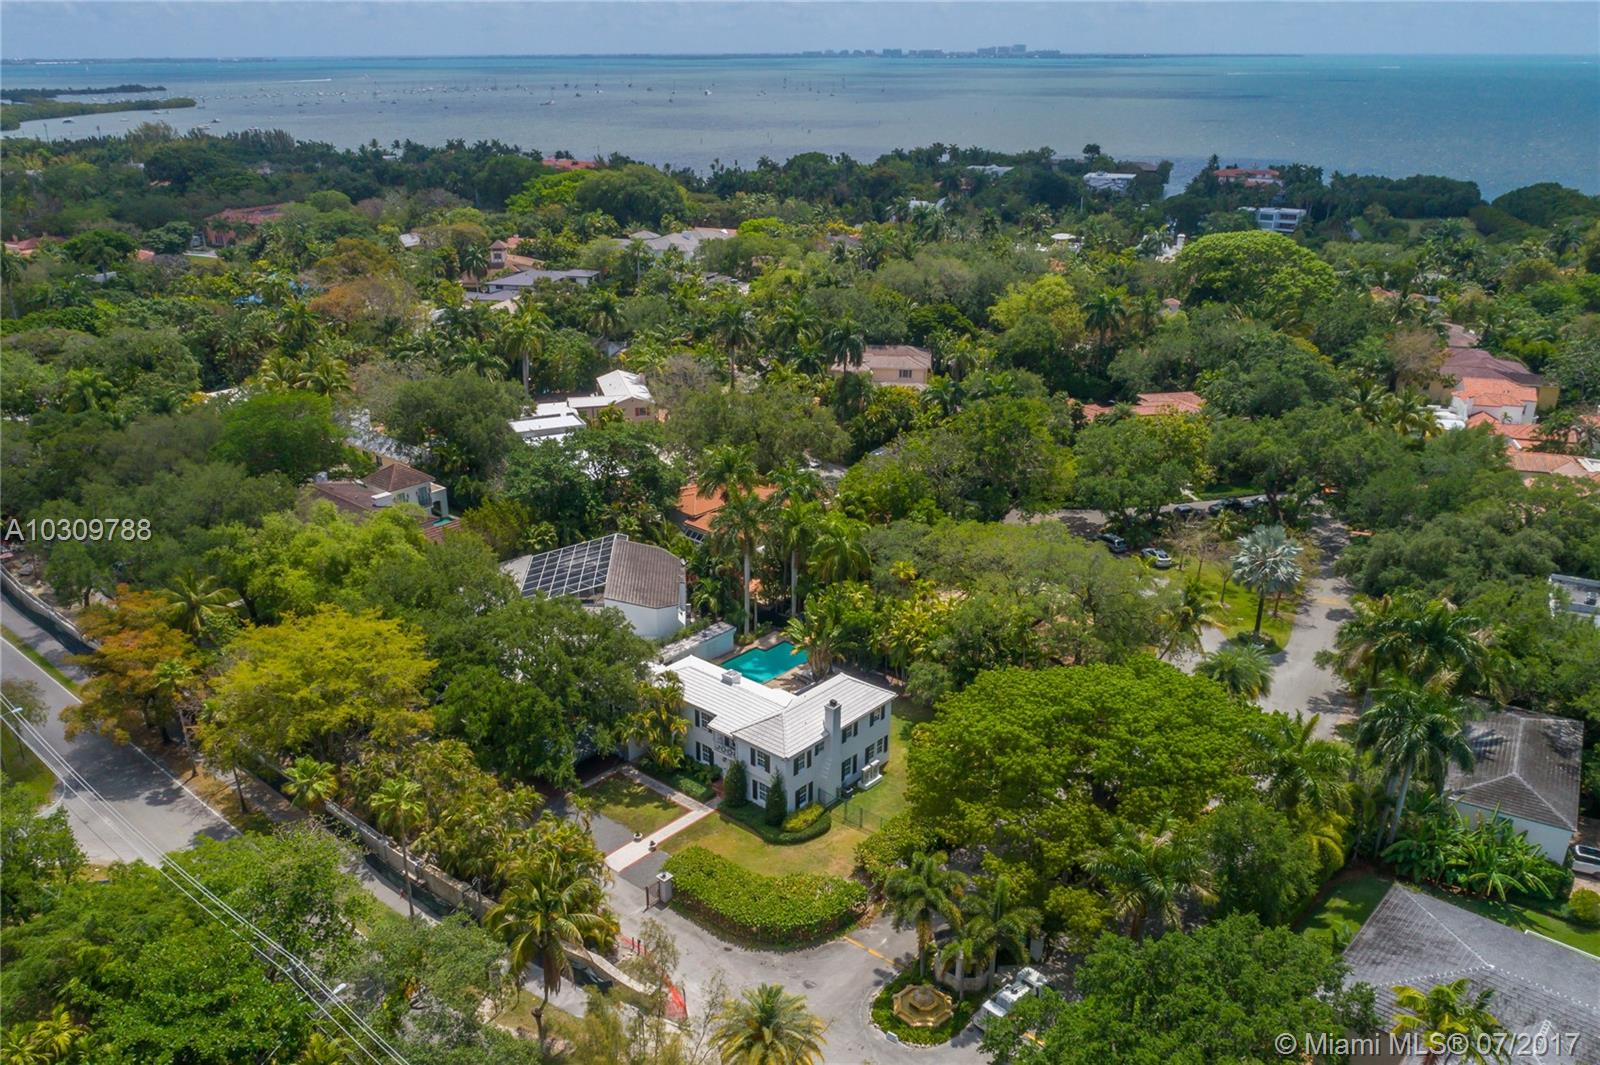 AEREAL VIEW OF COCONUT GROVE